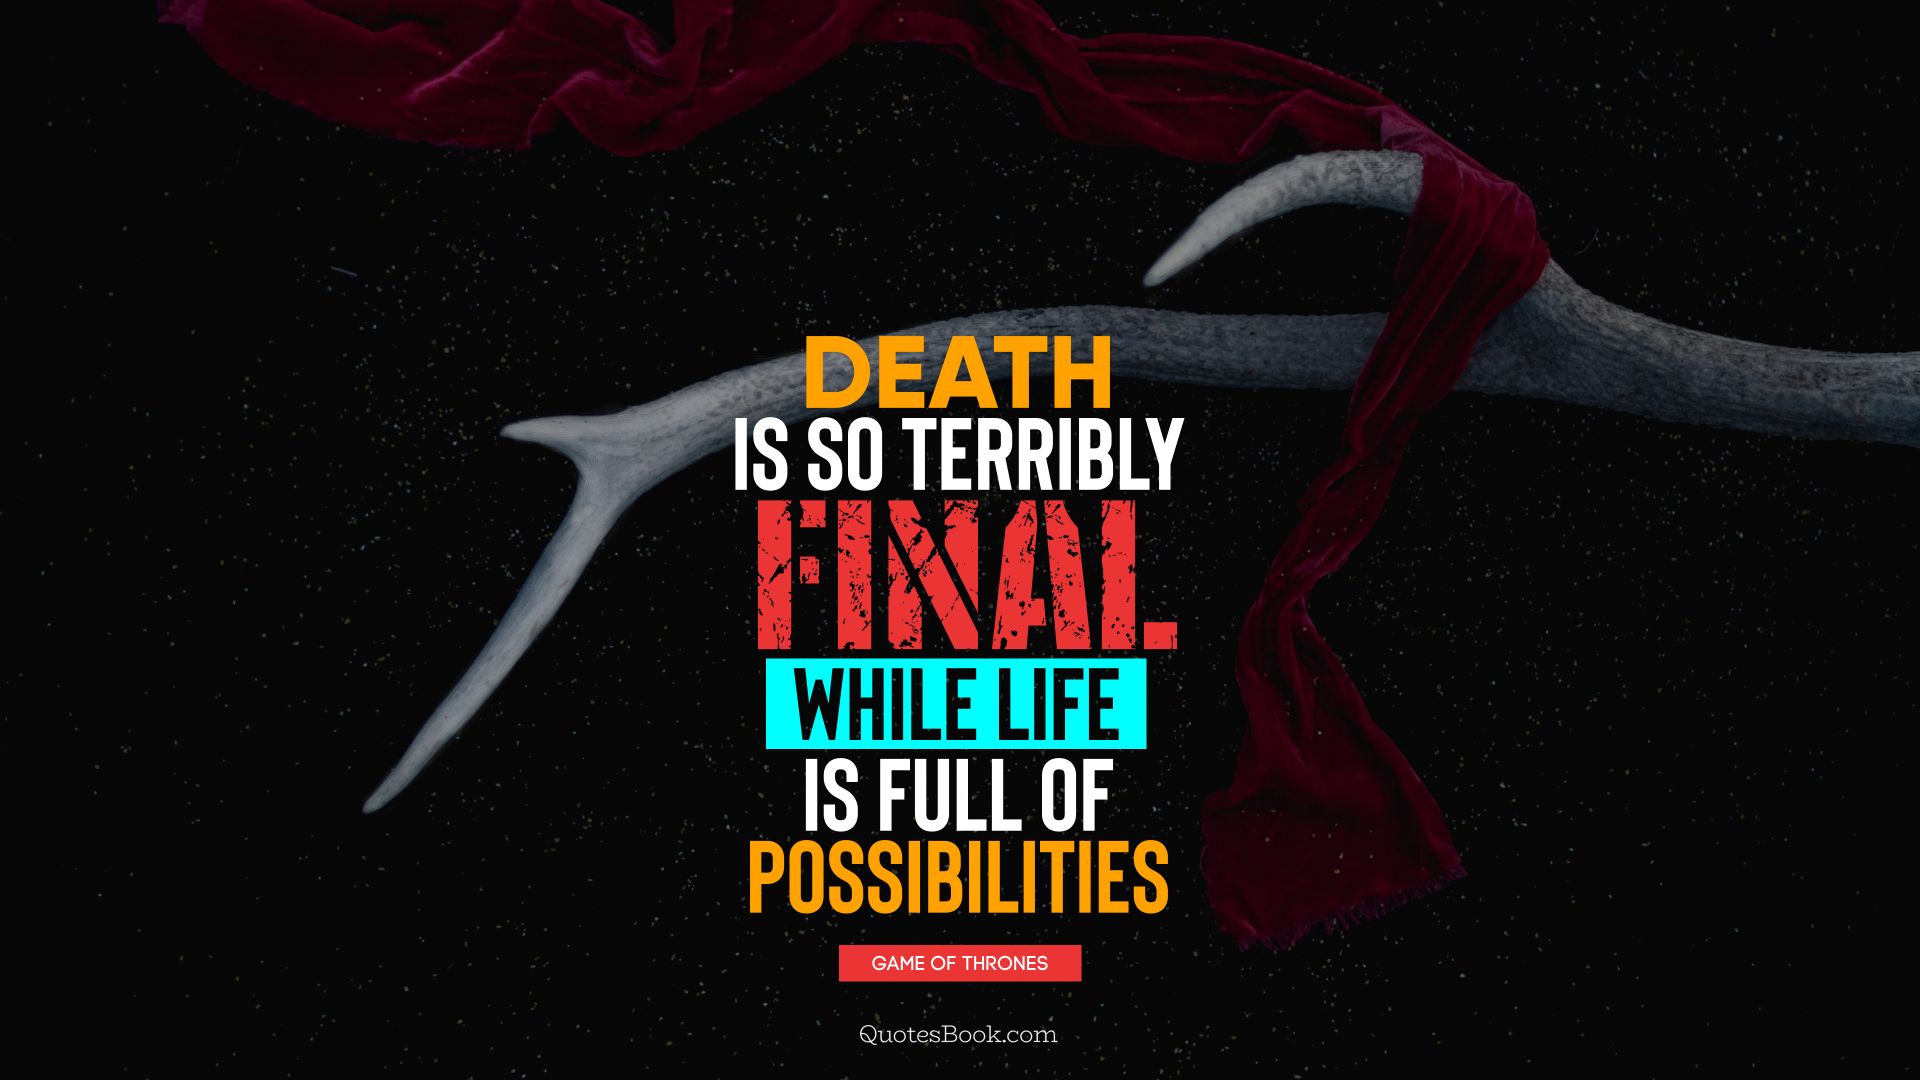 Death is so terribly final, while life is full of possibilities. - Quote by George R.R. Martin